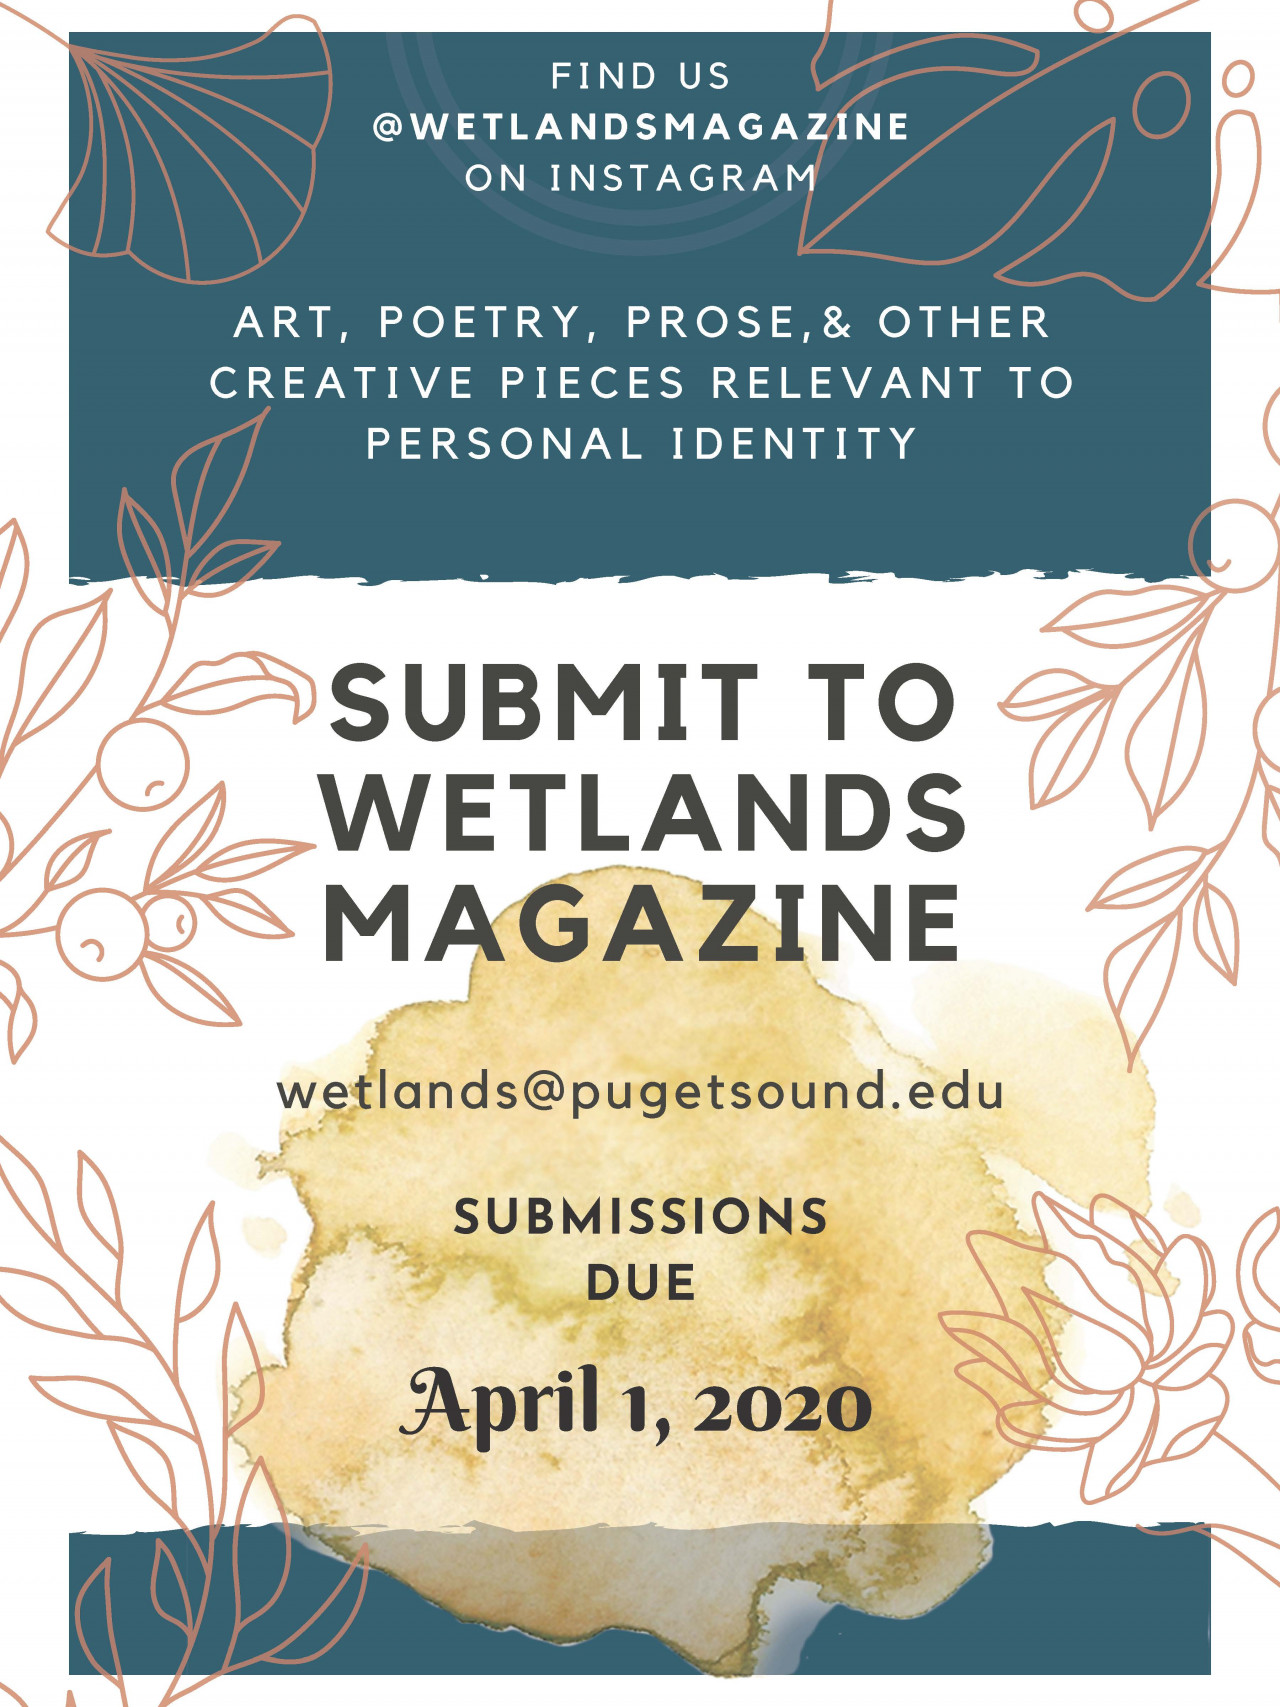 Wetlands Magazine call for submissions by April 1, 2020